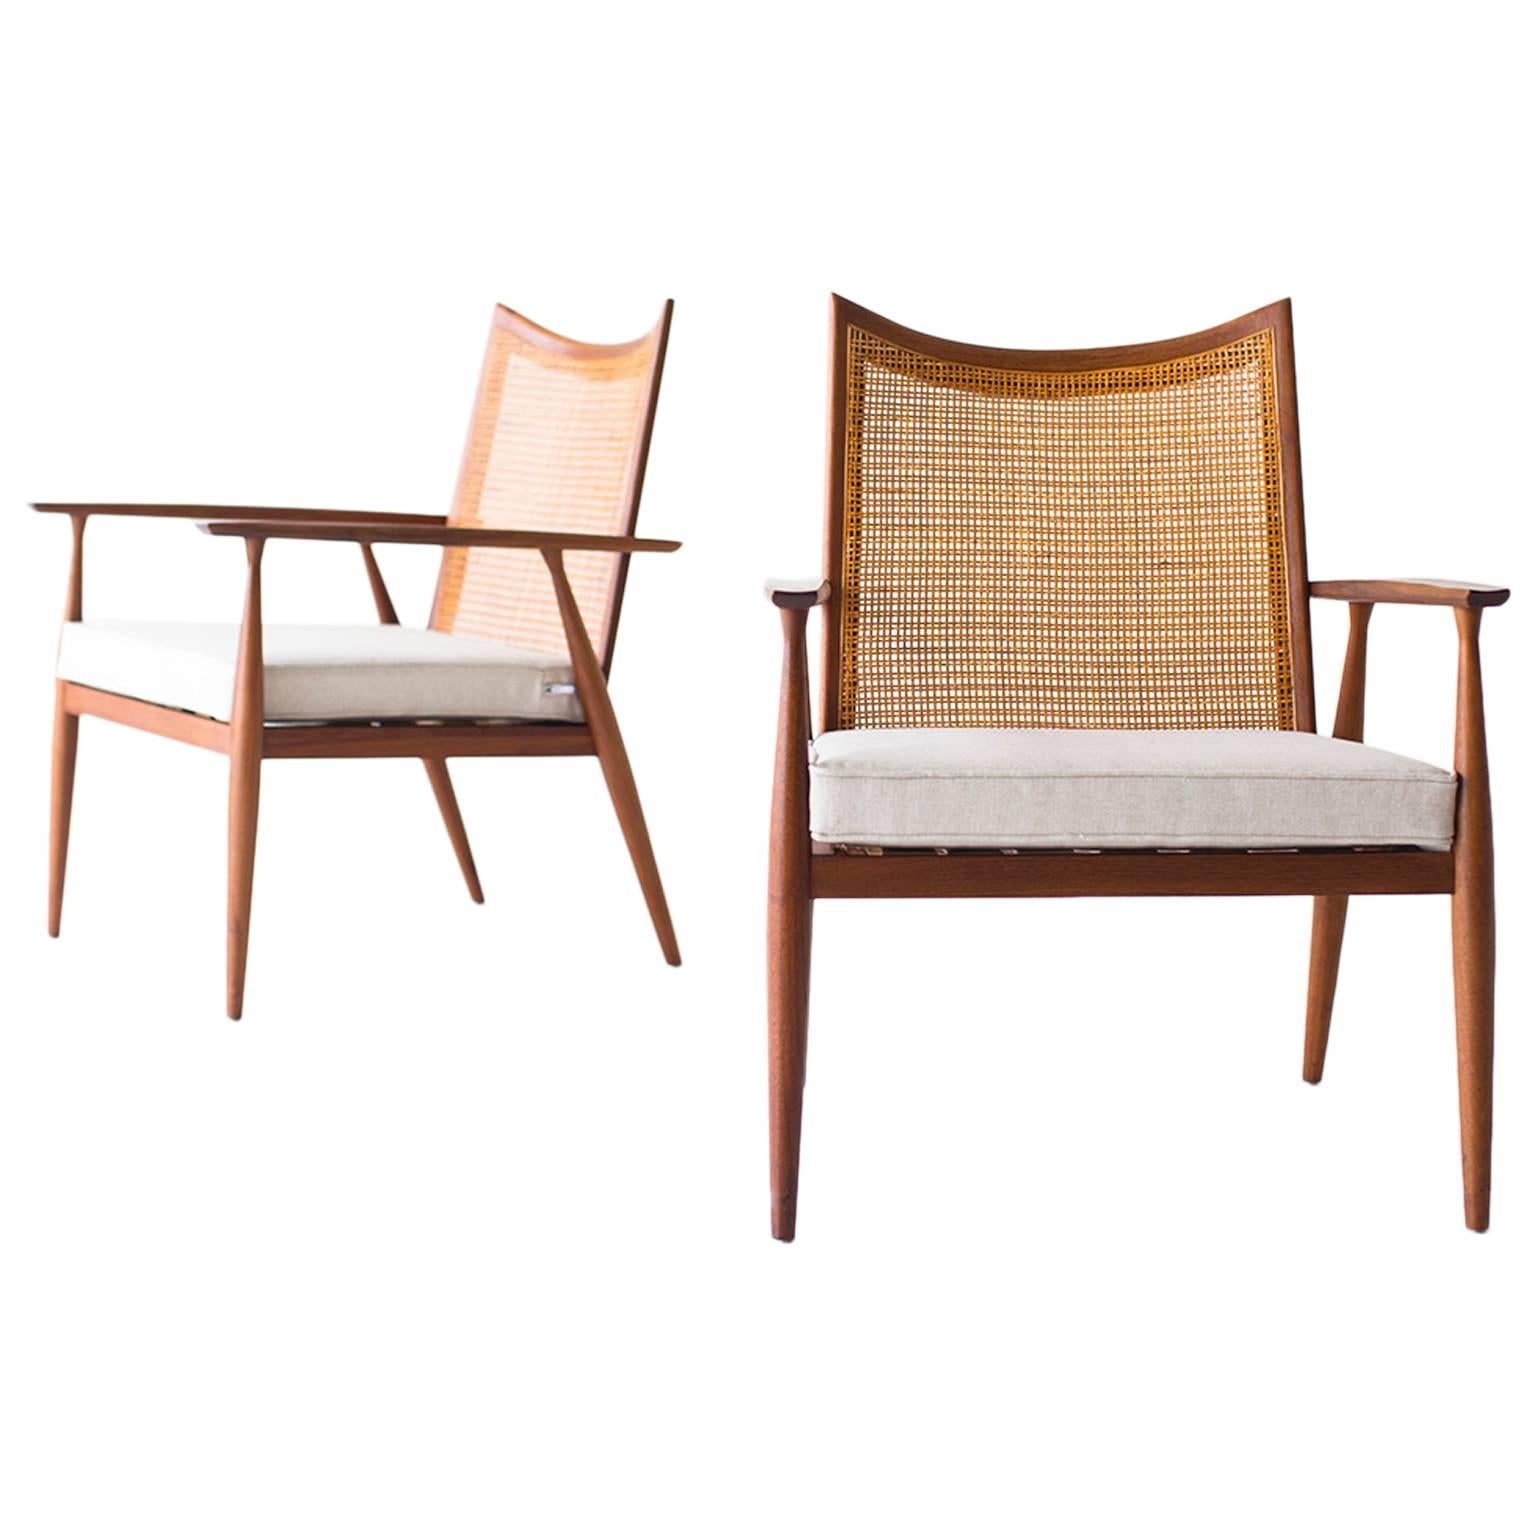 Paul McCobb Lounge Chairs for Winchendon, Planner Group Series